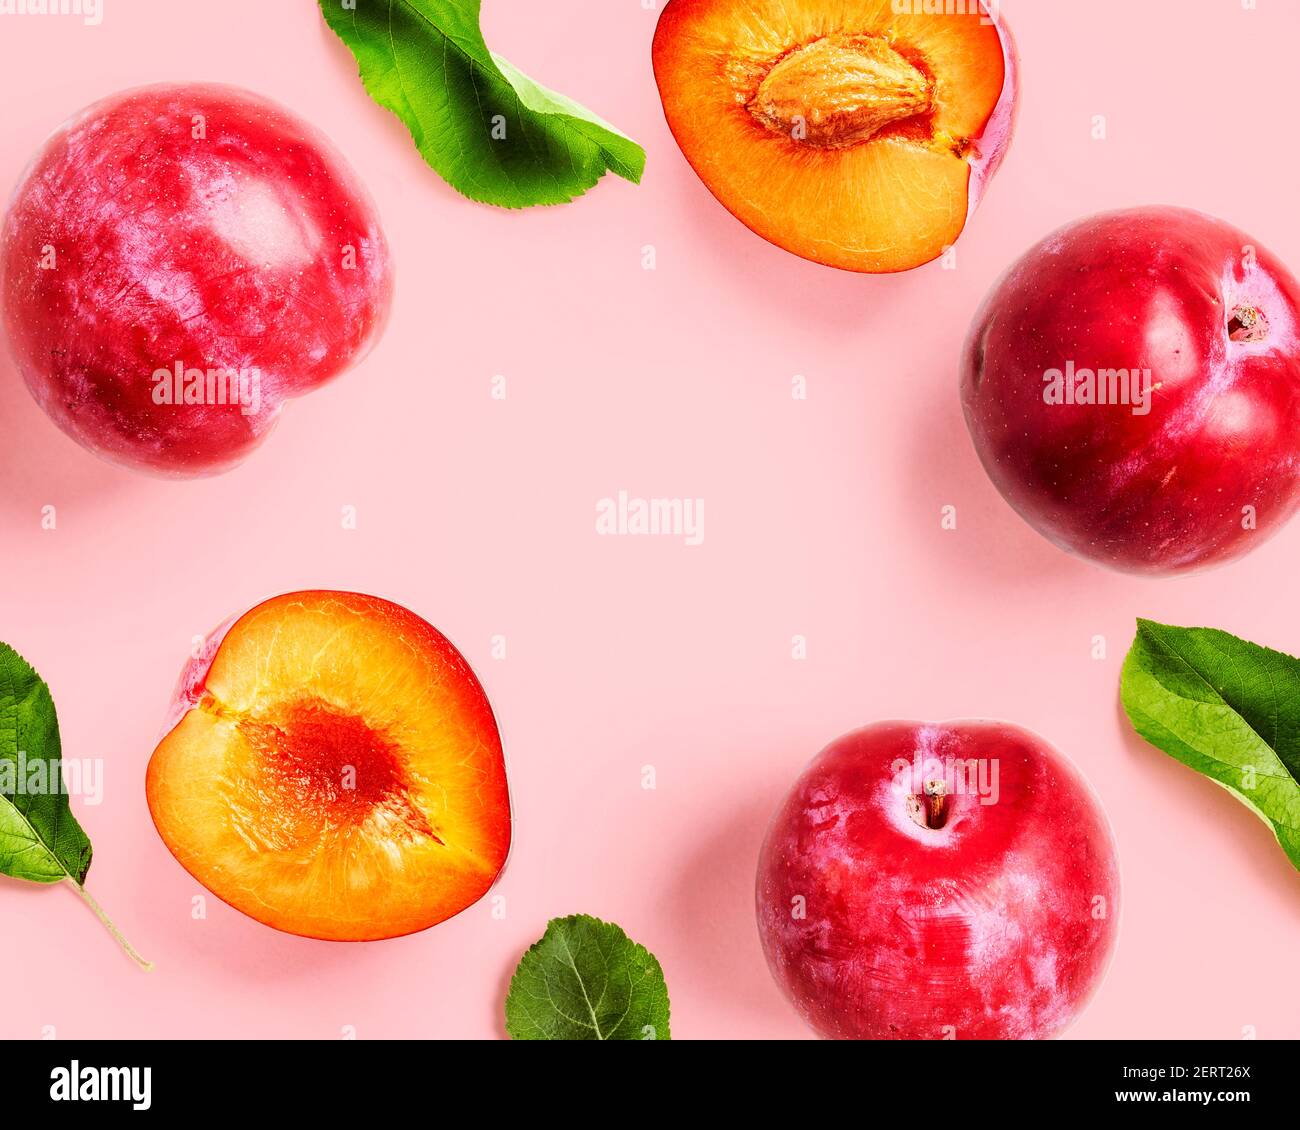 Red plum fruit creative layout and greeting card on pink background. Healthy eating and dieting food concept. Summer fresh fruits composition and arra Stock Photo